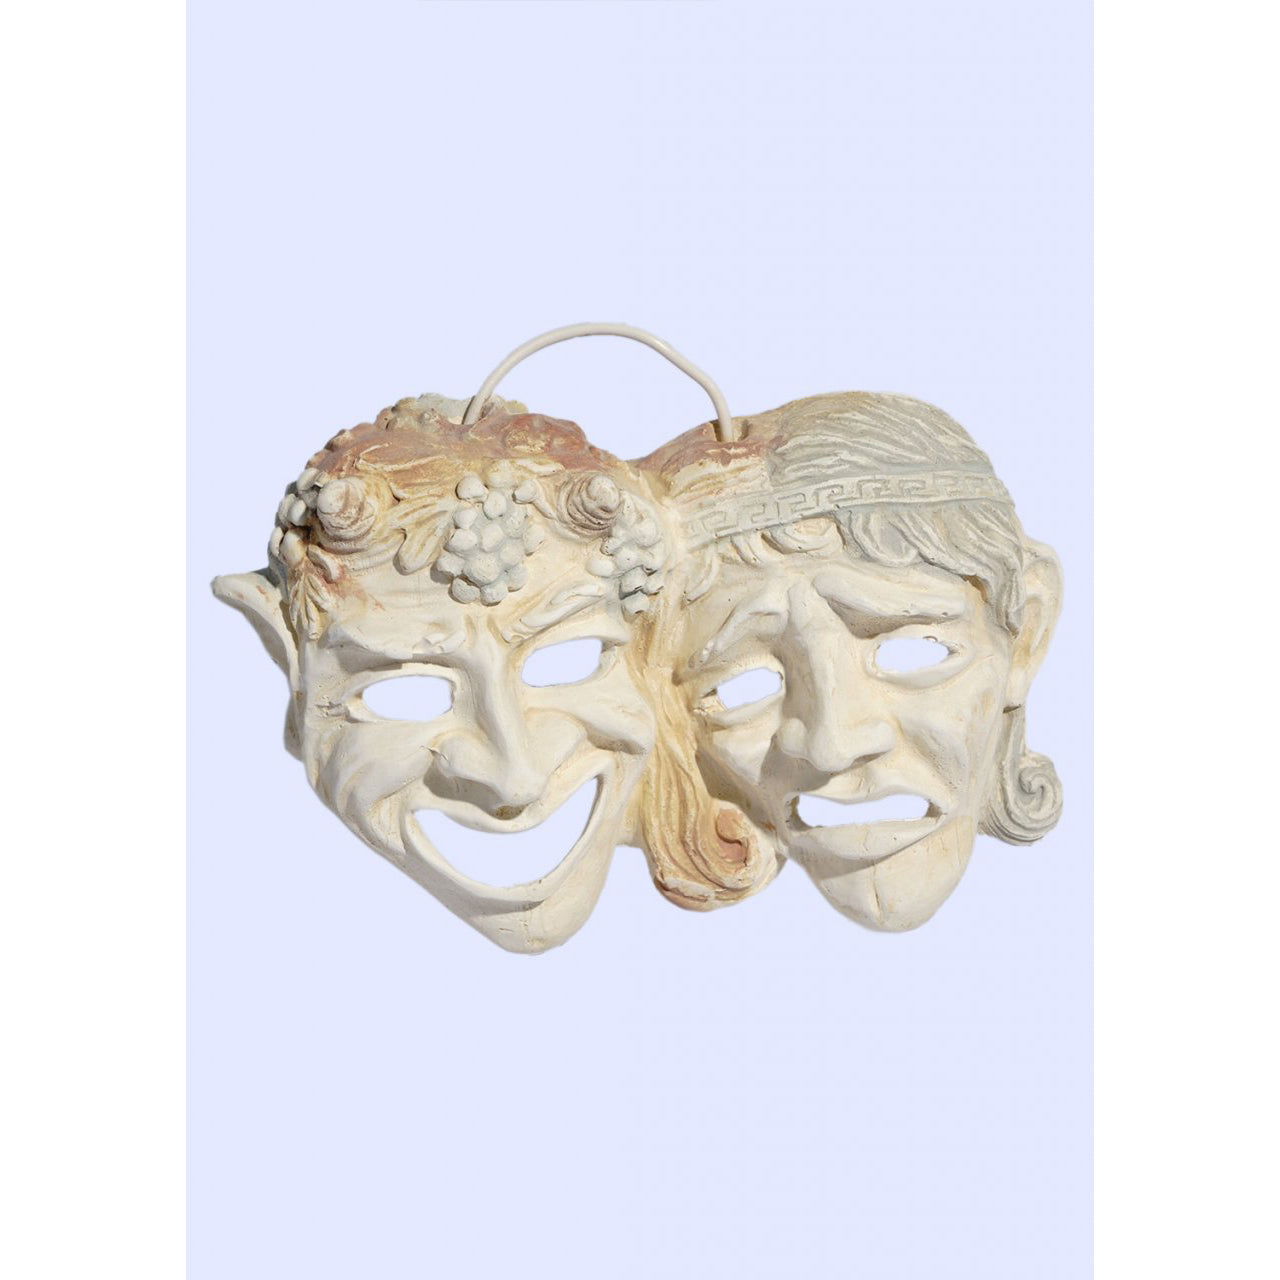 File:Ancient Greek theatrical mask of Zeus, replica (8380375983